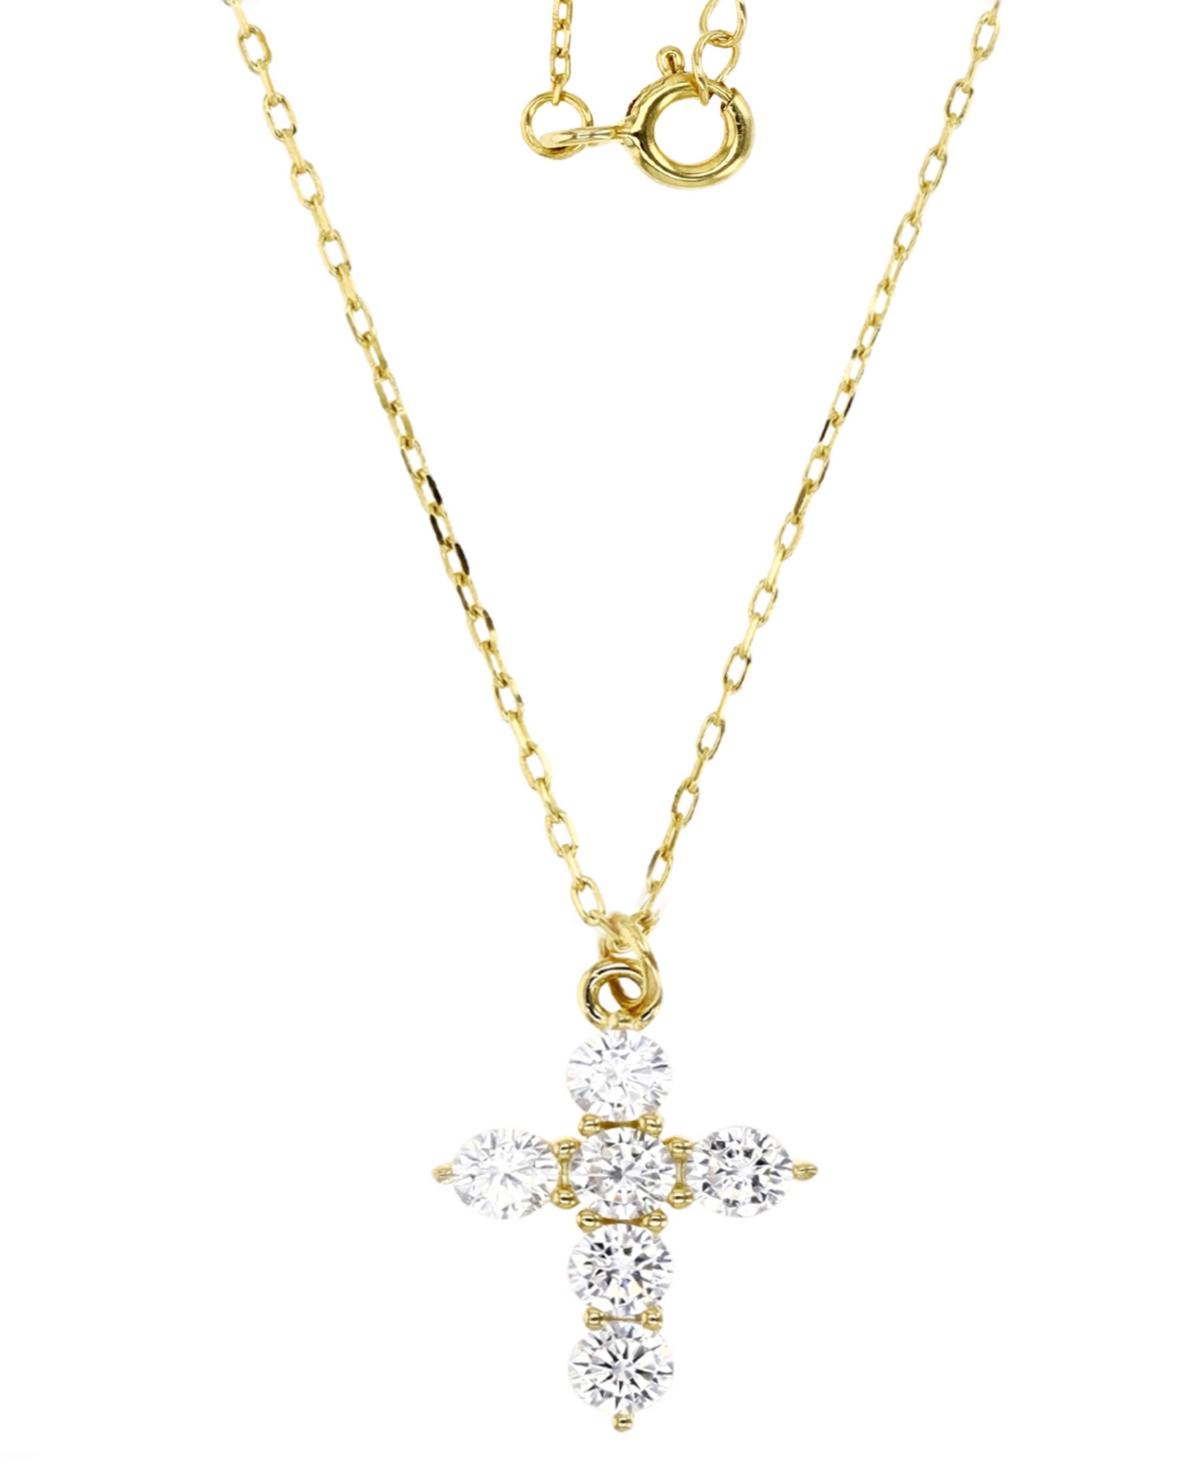 Cubic Zirconia Cross Pendant Necklace in 14k Gold-Plated Sterling Silver, 16" + 2" extender - Gold